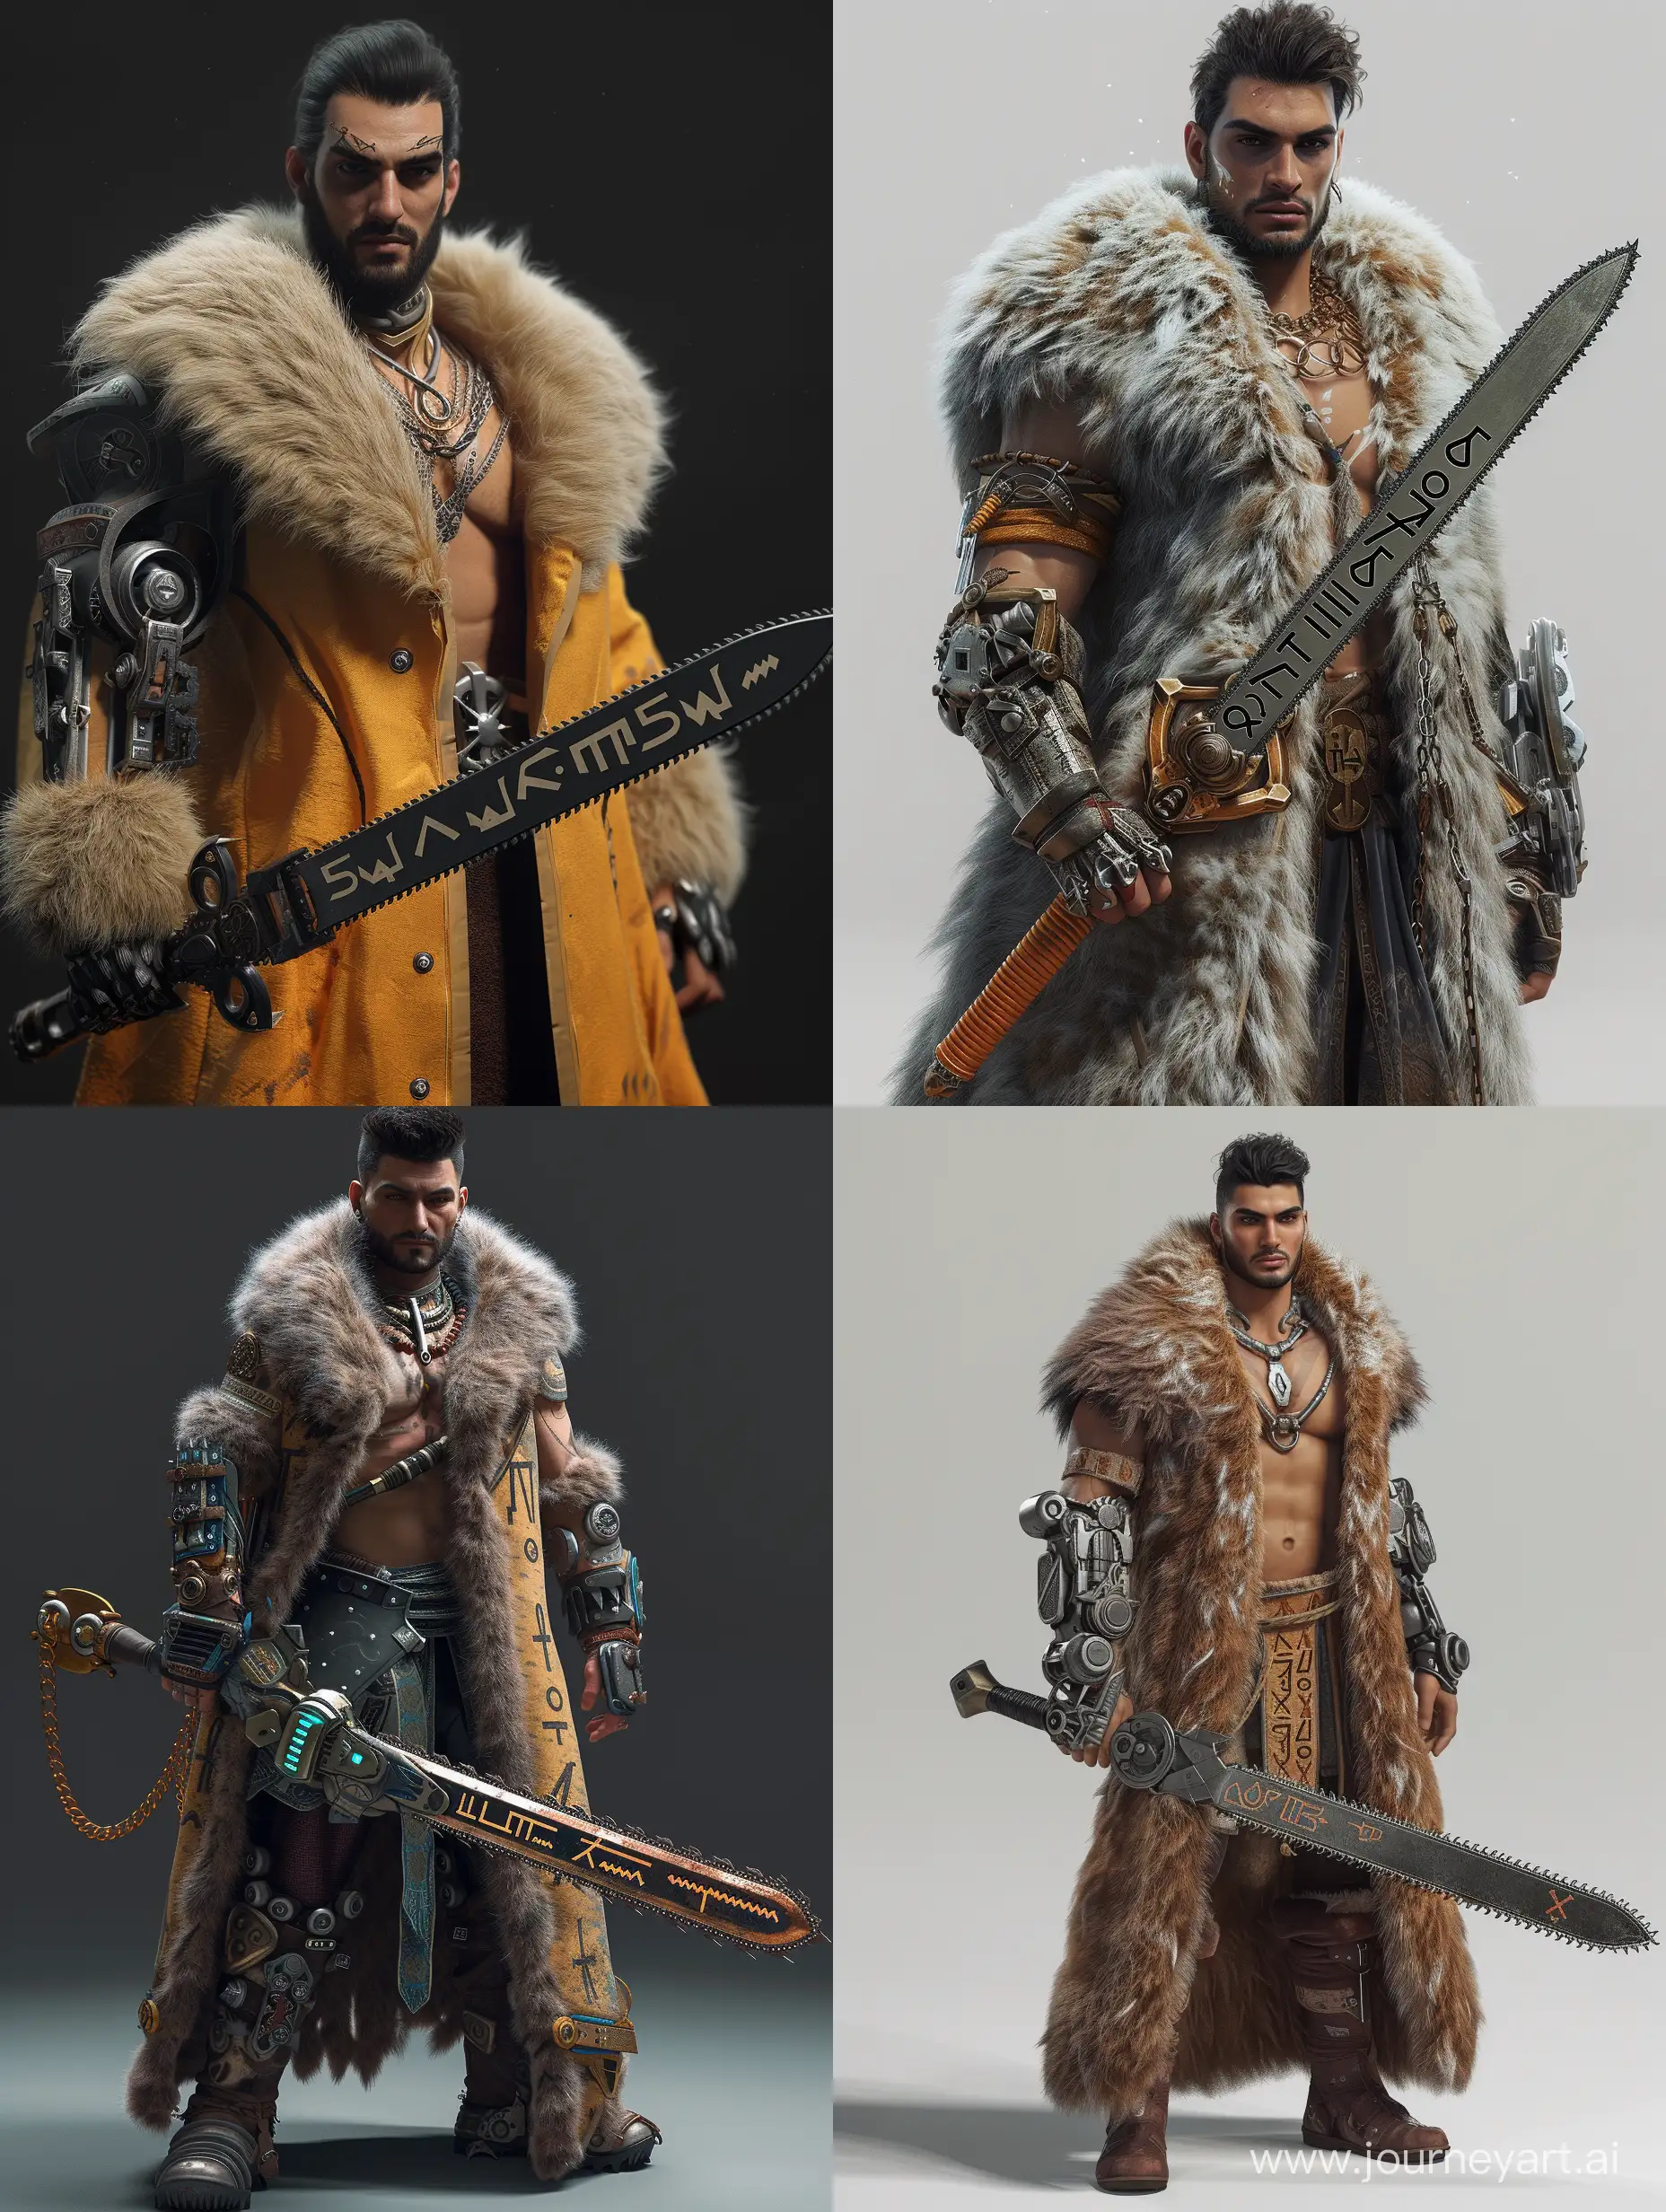 persian man[18 years old,handsome,beautiful,Long fur coat]with sword [chainsaw blades,cuneiform letters curving on it]and mechanical armglove[powerful,intricate],incredible detail,Steampunk,Unreal engine 5.

